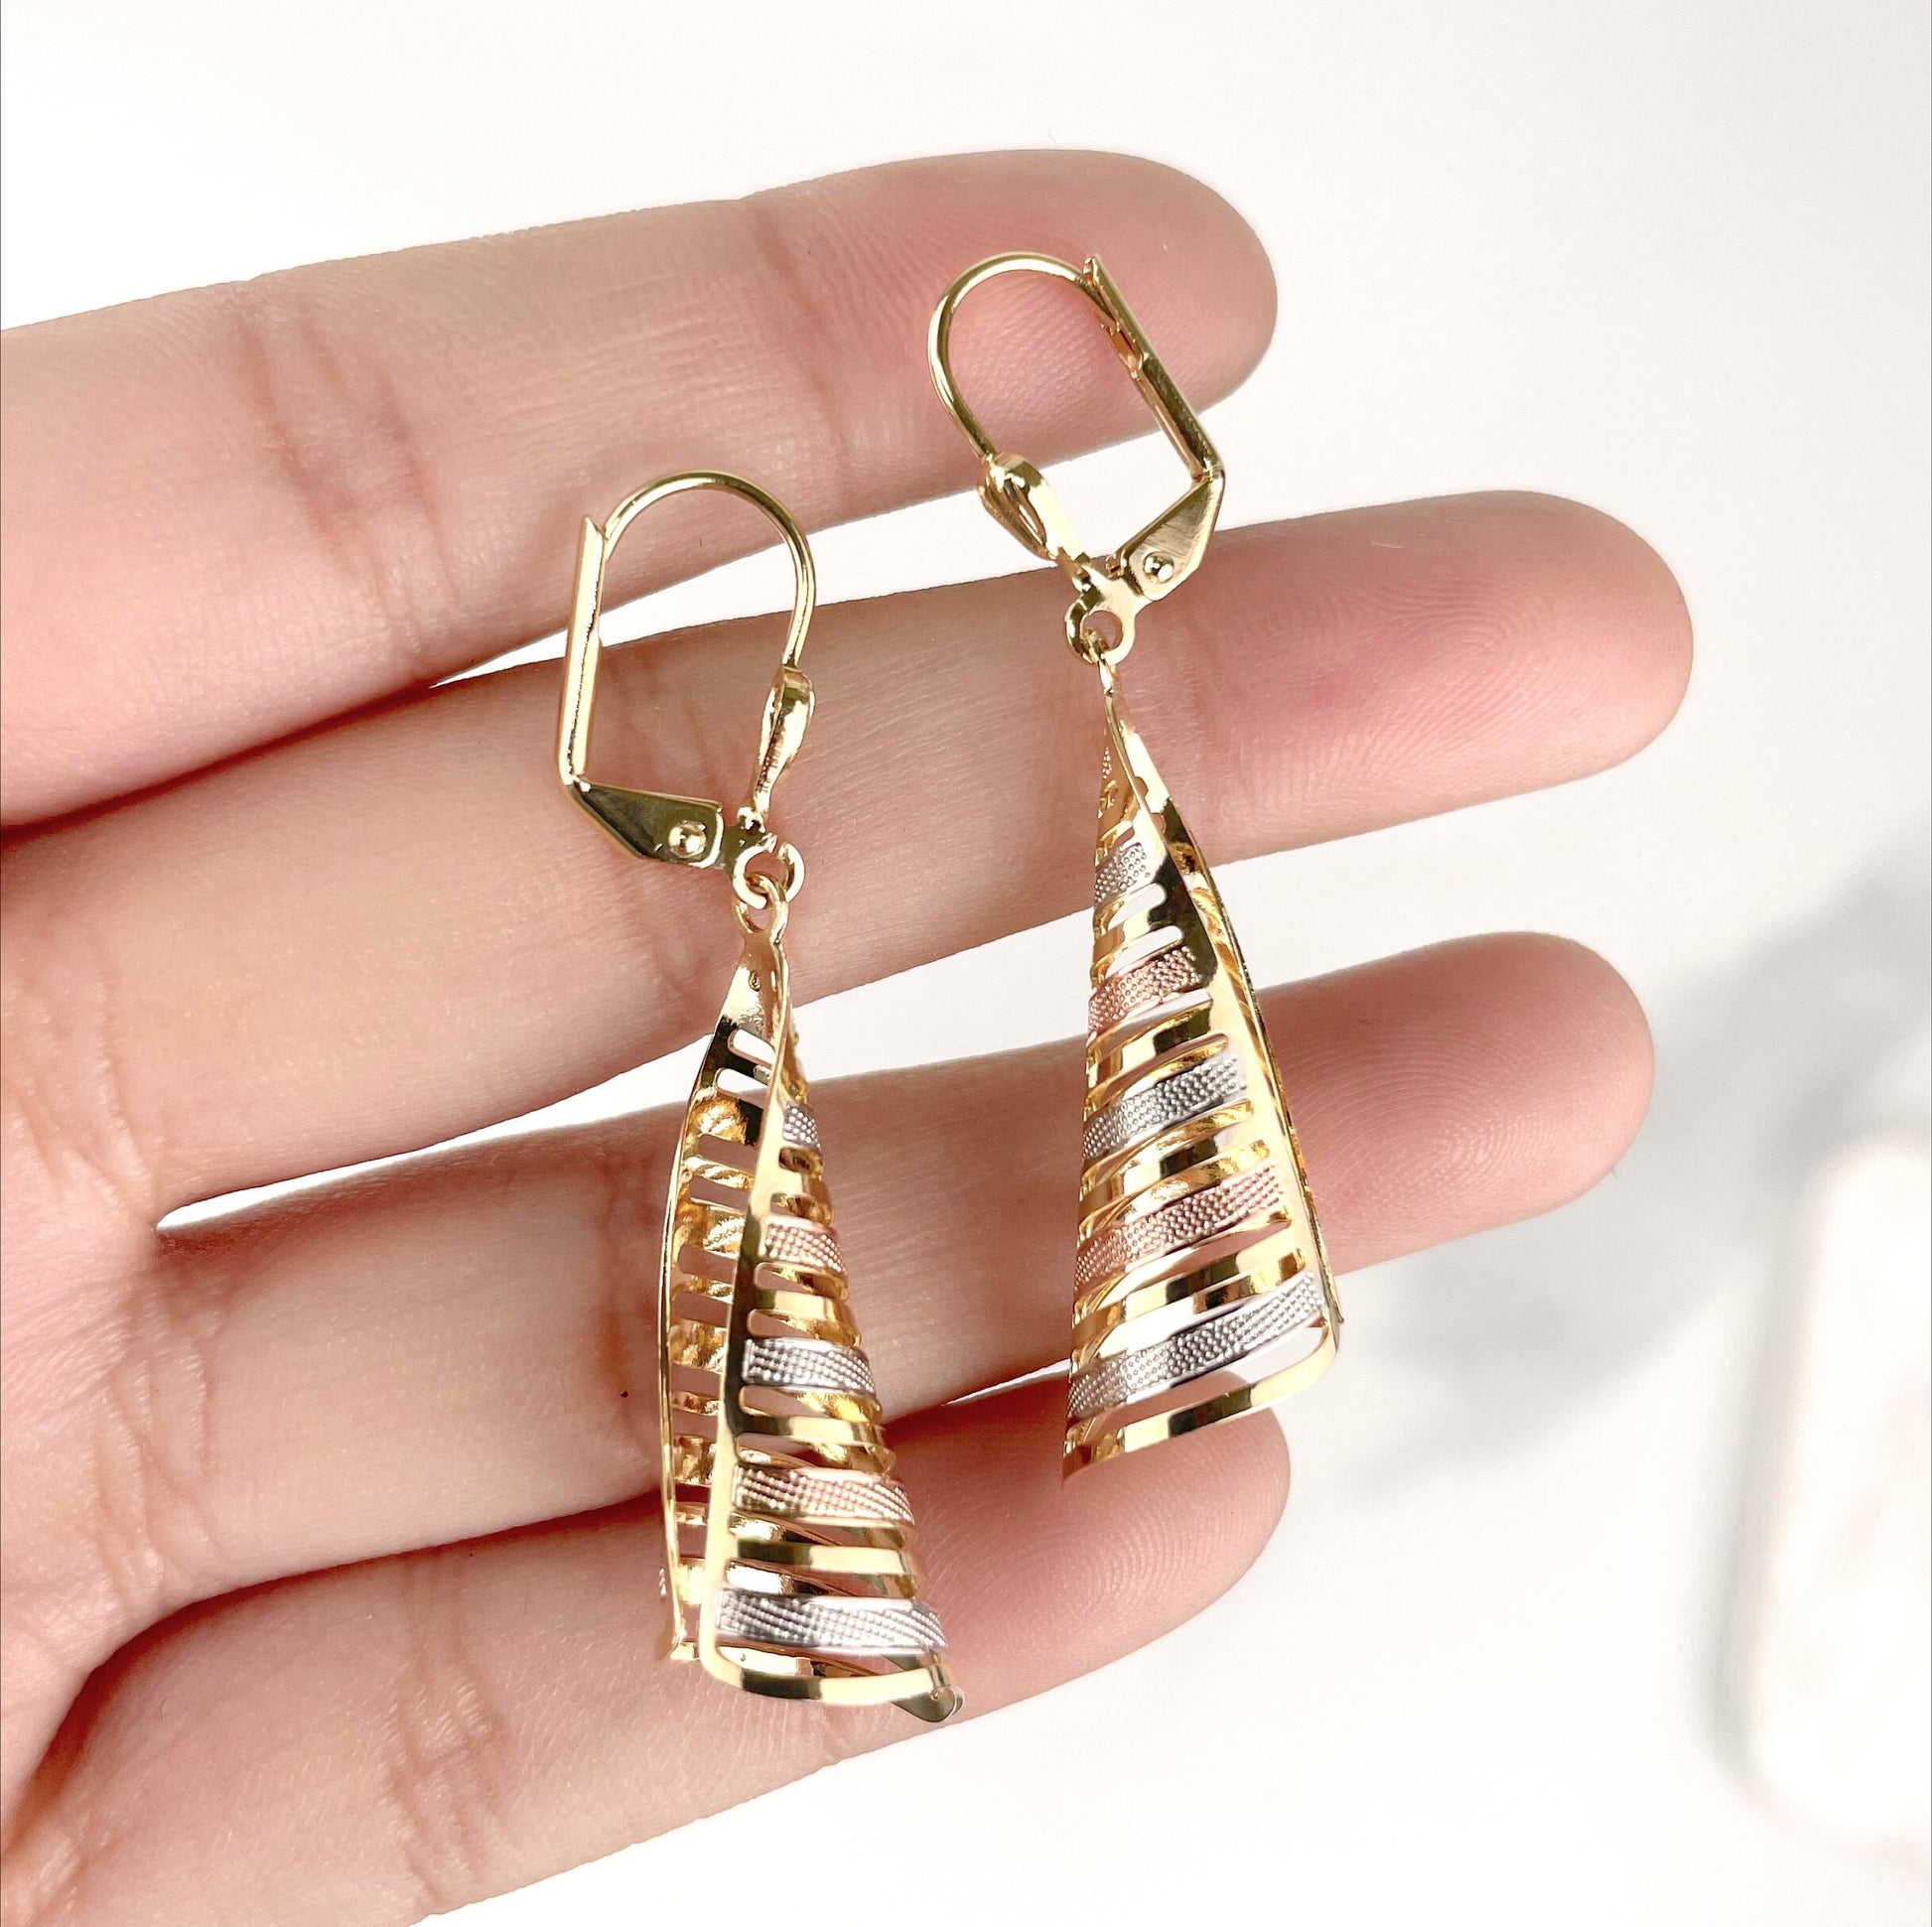 18k Gold Filled Three Tone Dangle Earrings Wholesale Jewelry Making Supplies